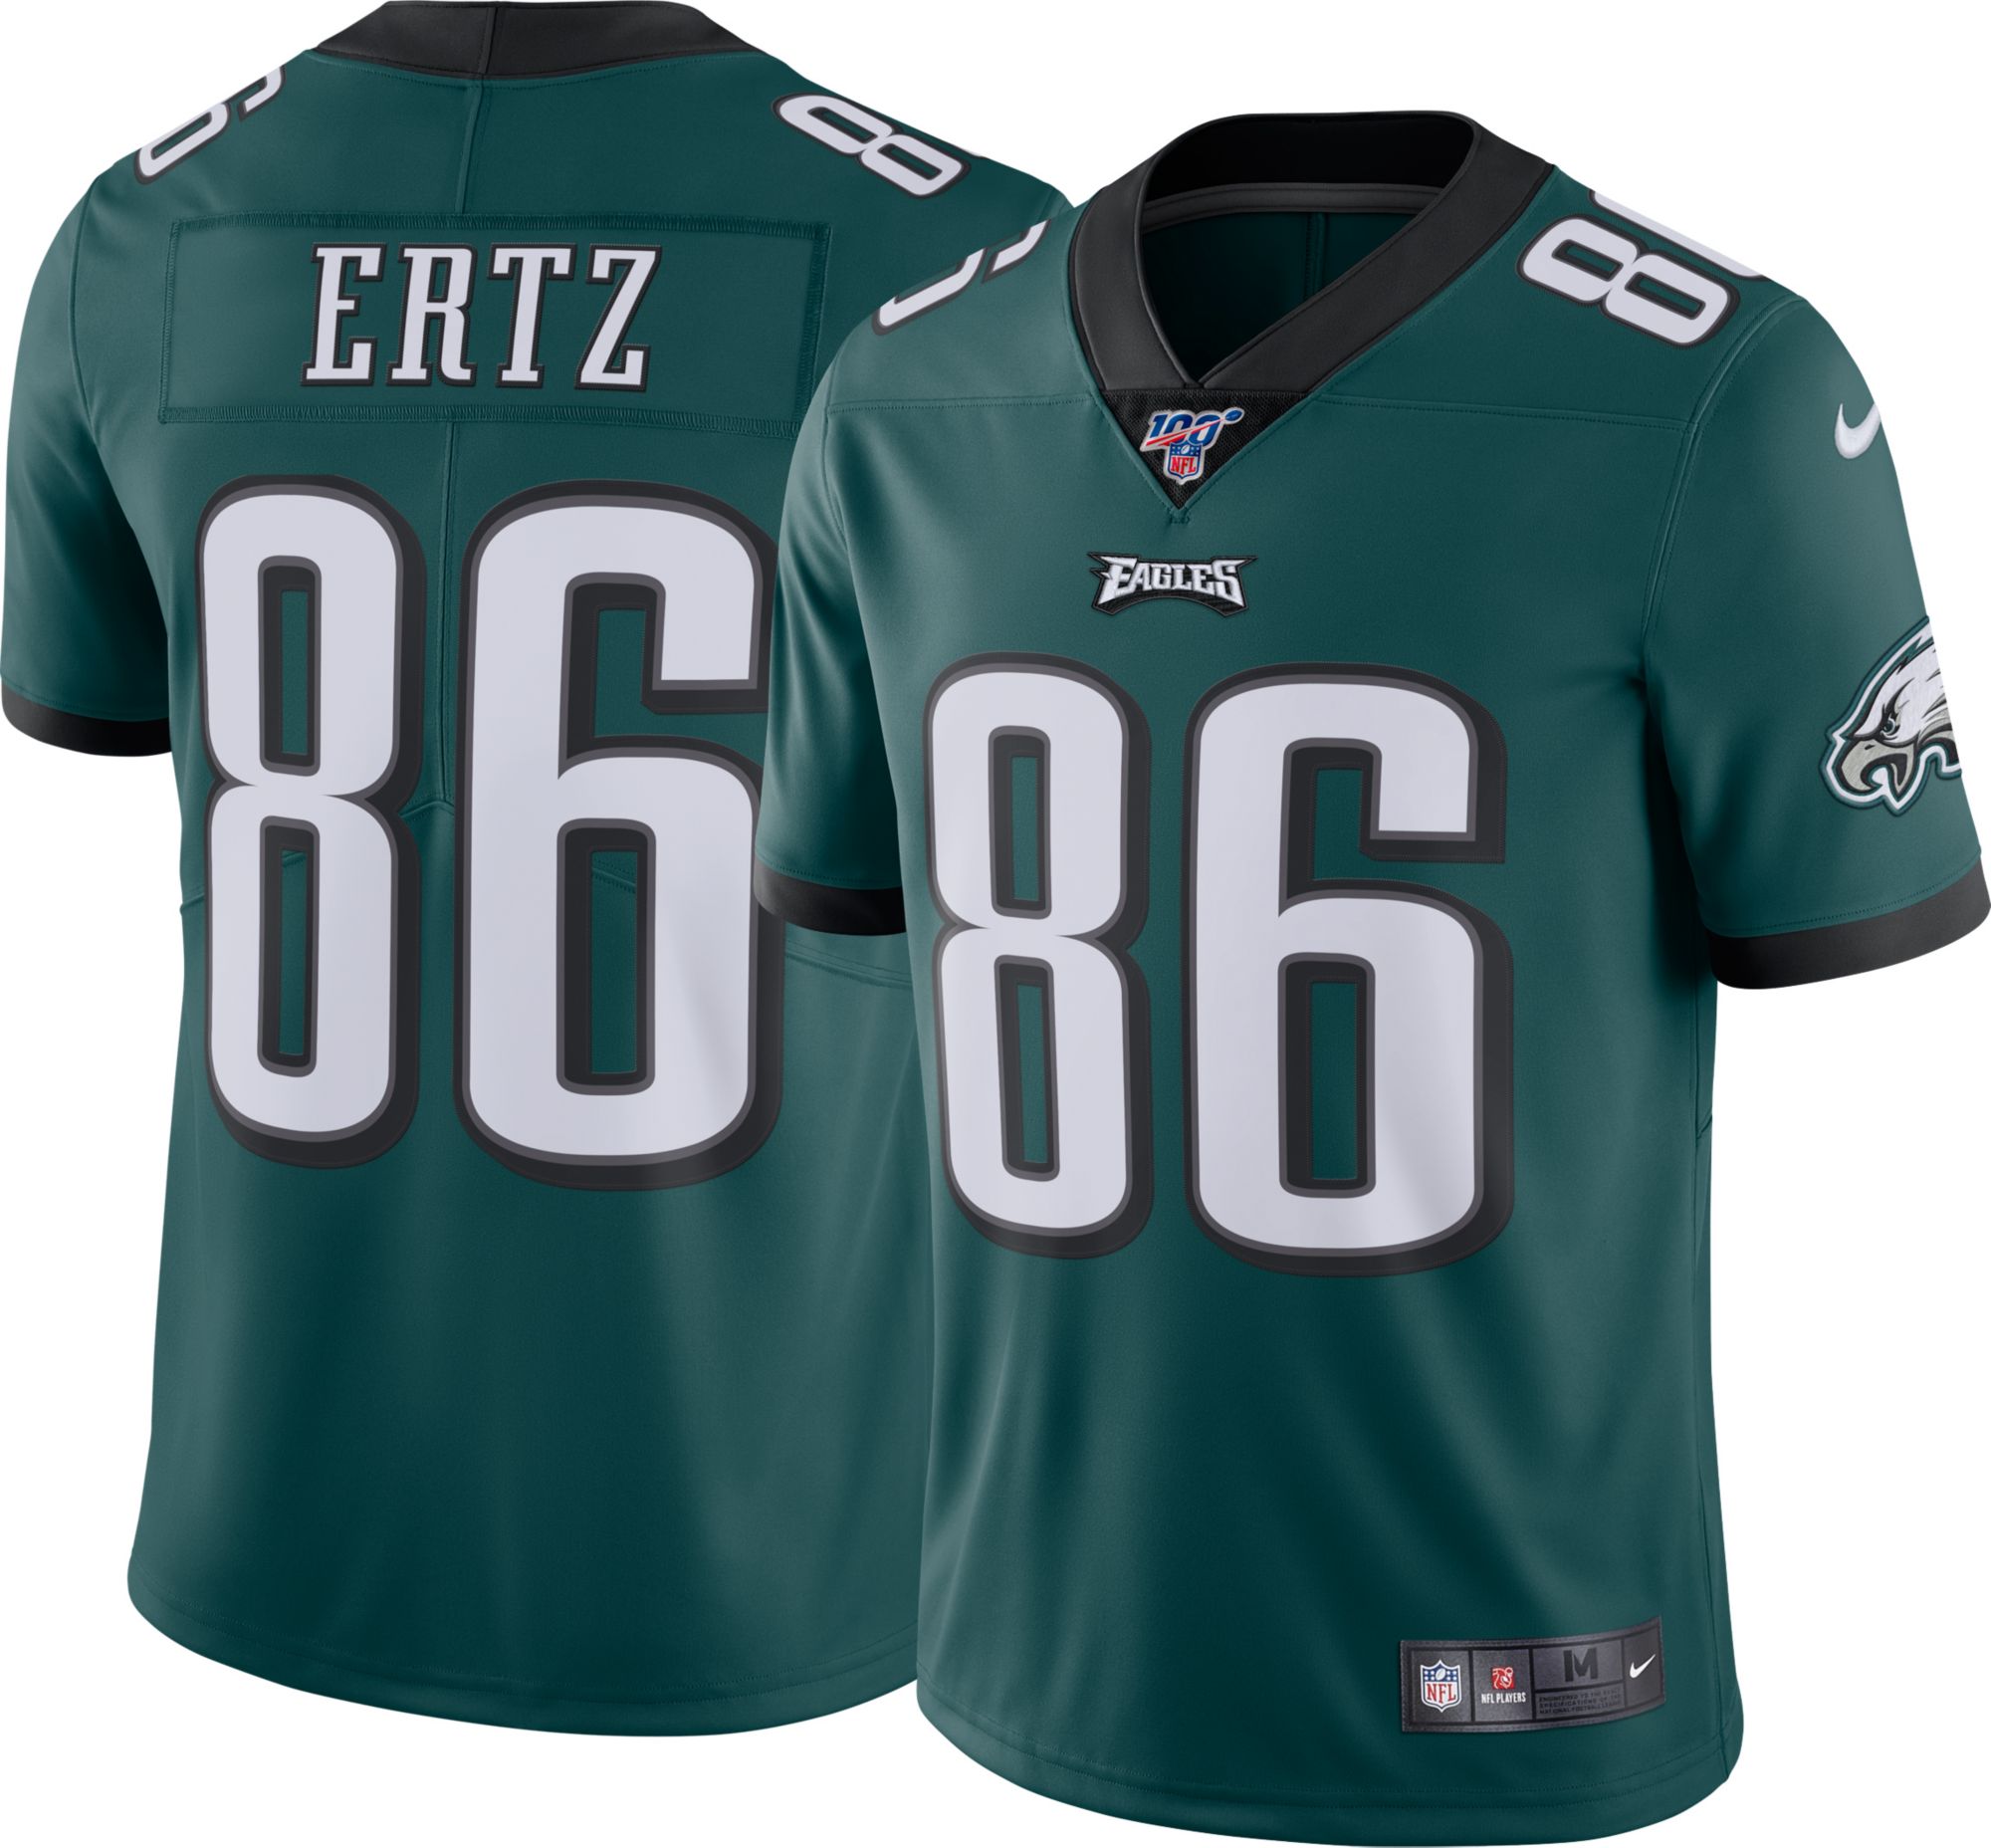 eagles 86 jersey